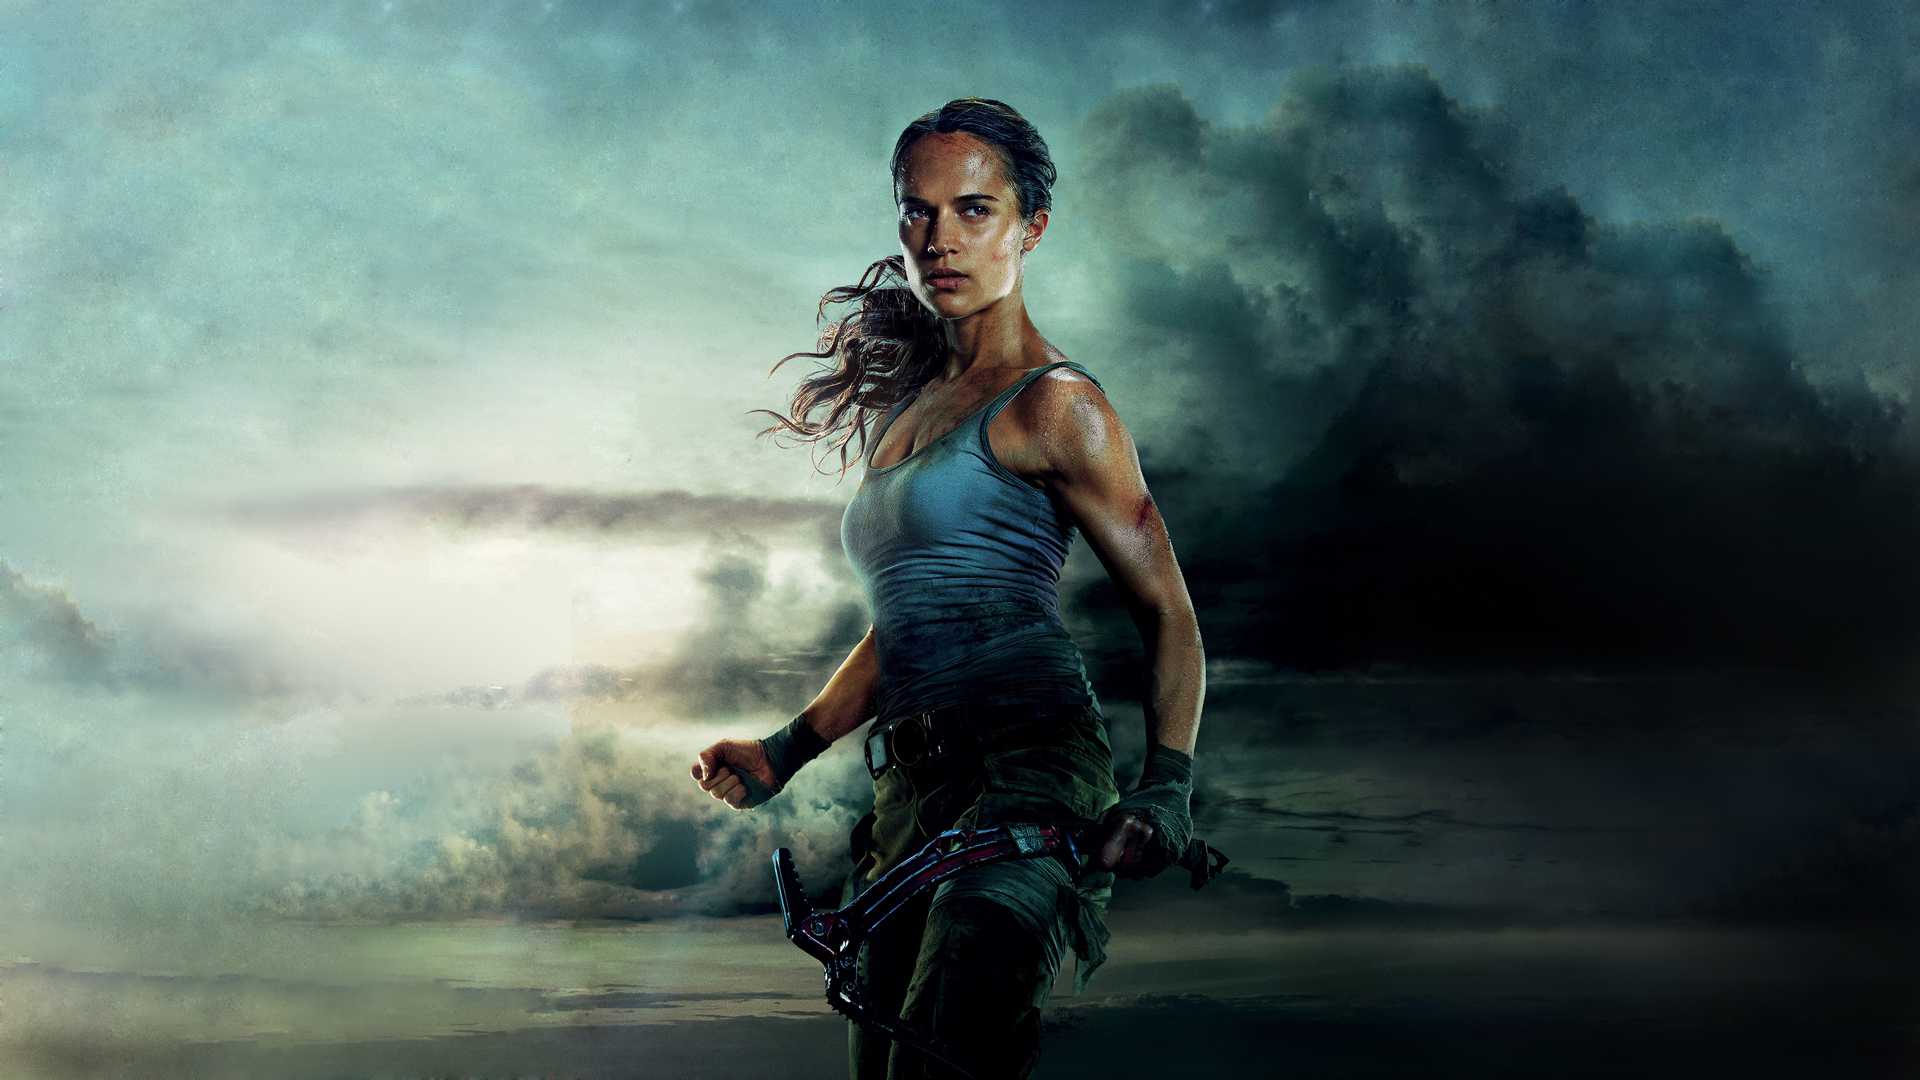 Tomb Raider 2018 Movie Alicia Vikander, HD Movies, 4k Wallpapers, Images, Backgrounds, Photos 